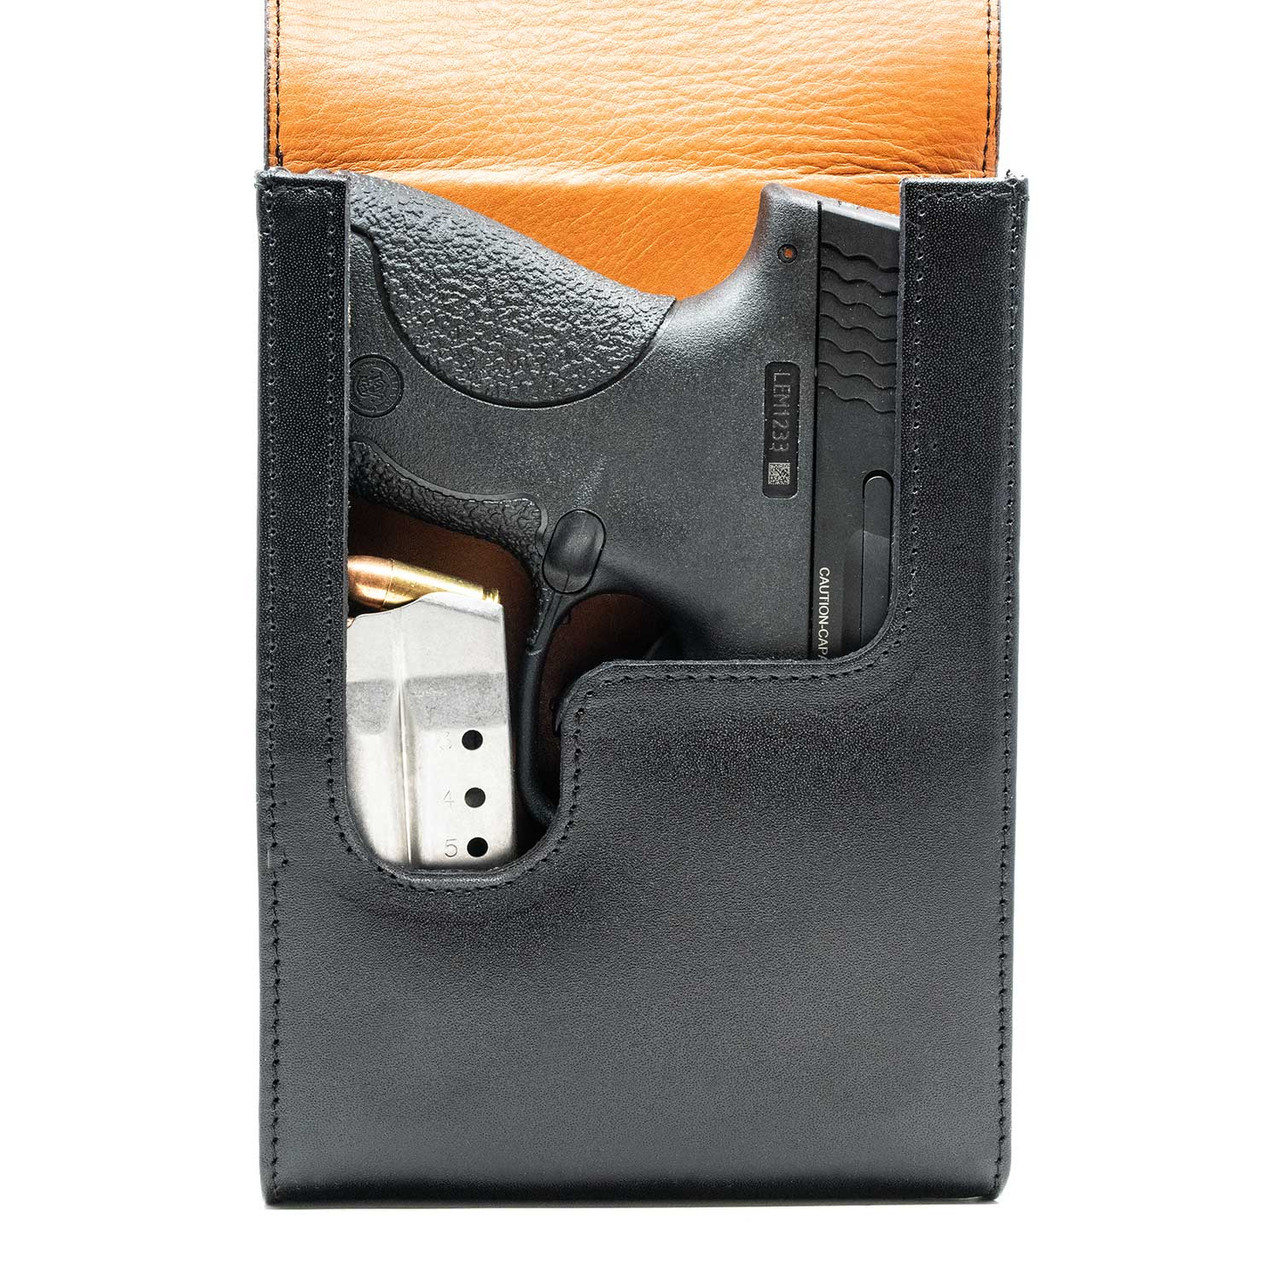 The Taurus .38 Special Xtra Mag Black Leather Holster